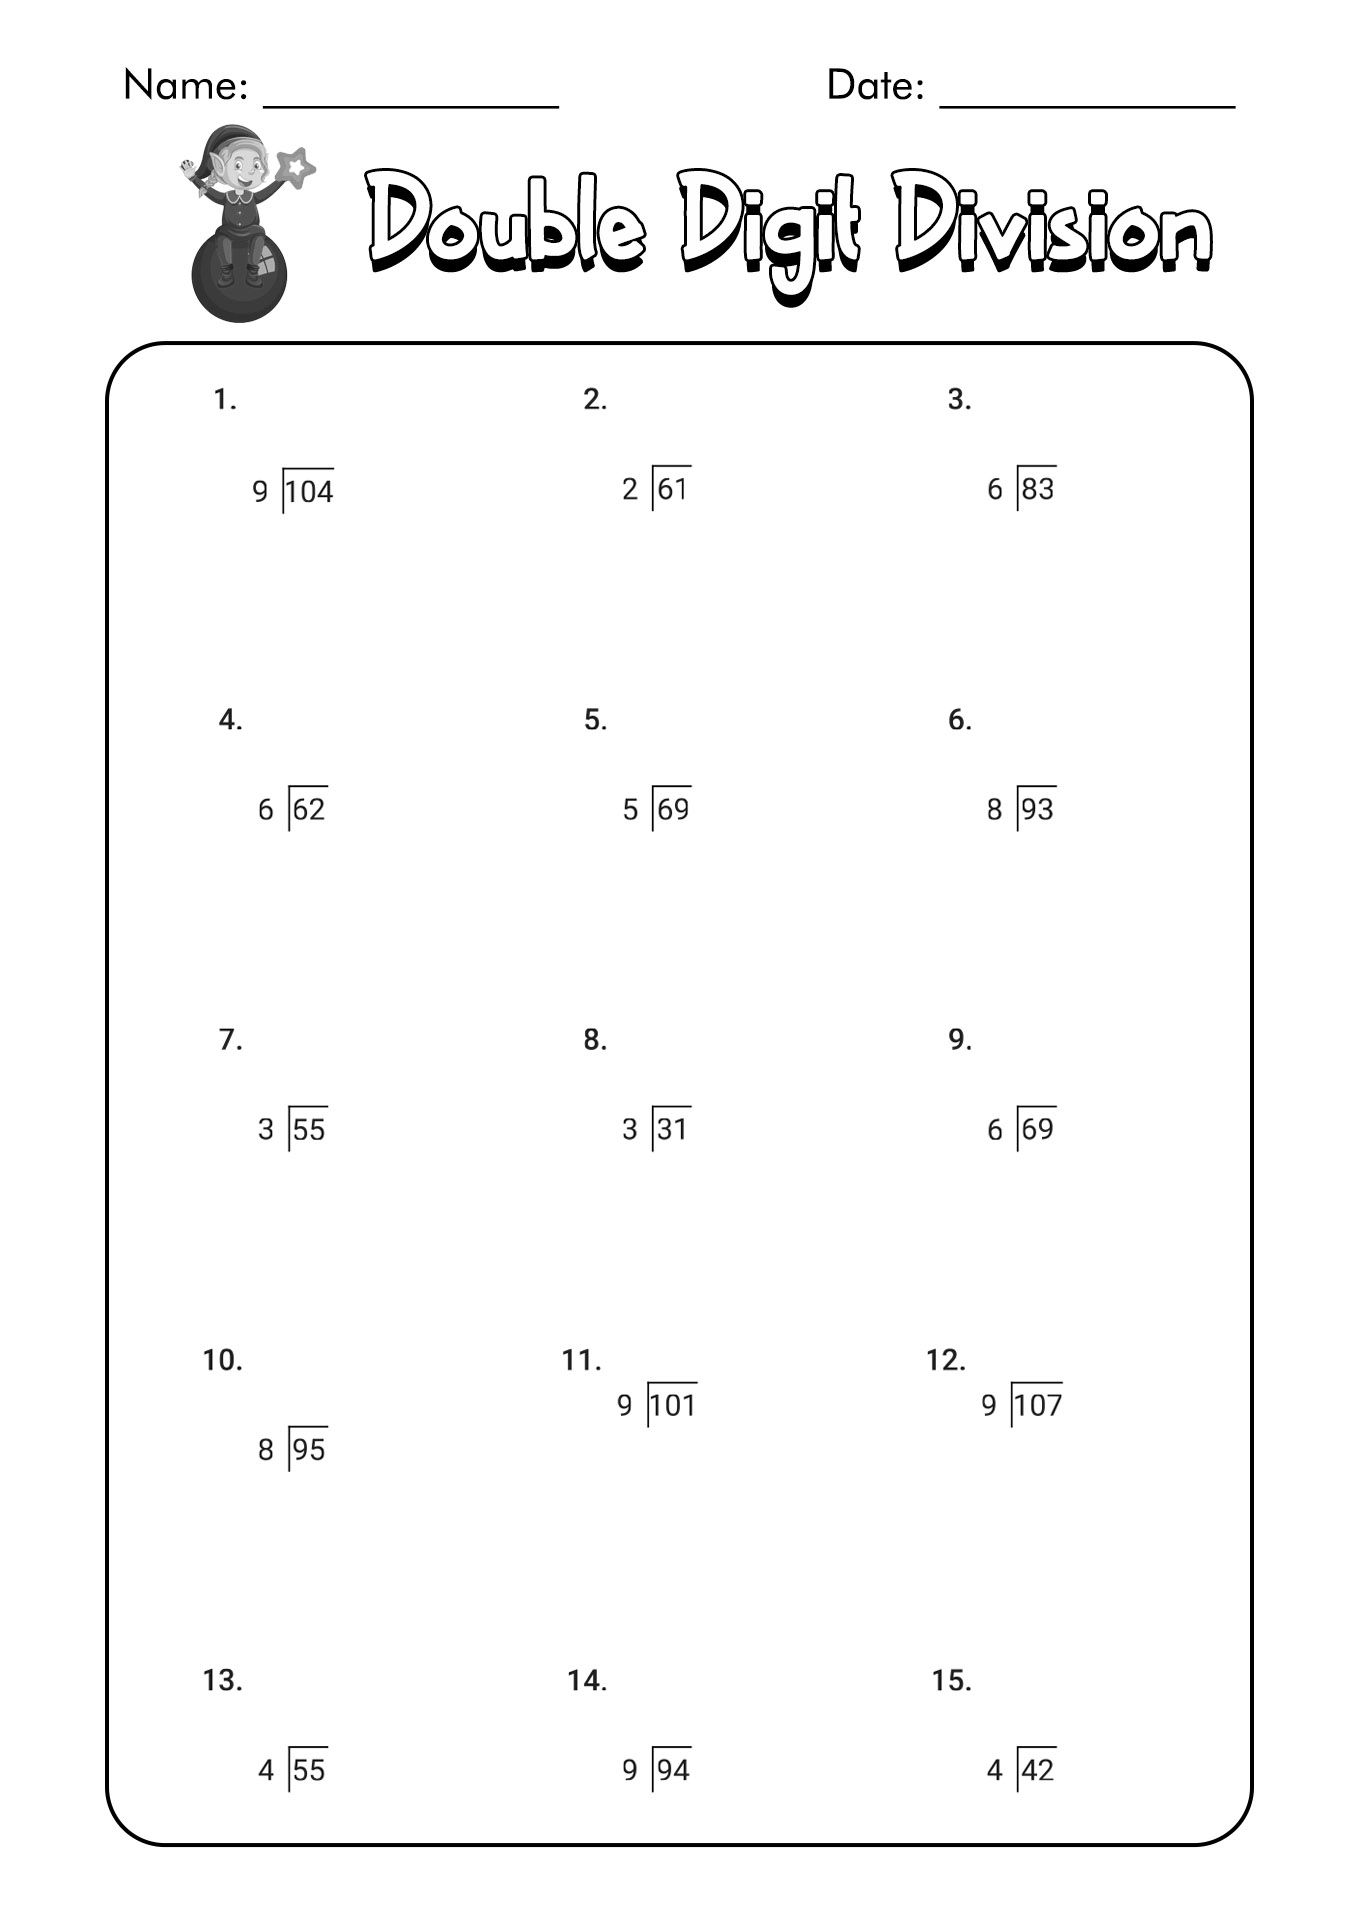 13 Best Images Of Division By 2 And 3 Worksheets Divide By 2 Worksheets 3 By 2 Digit Division